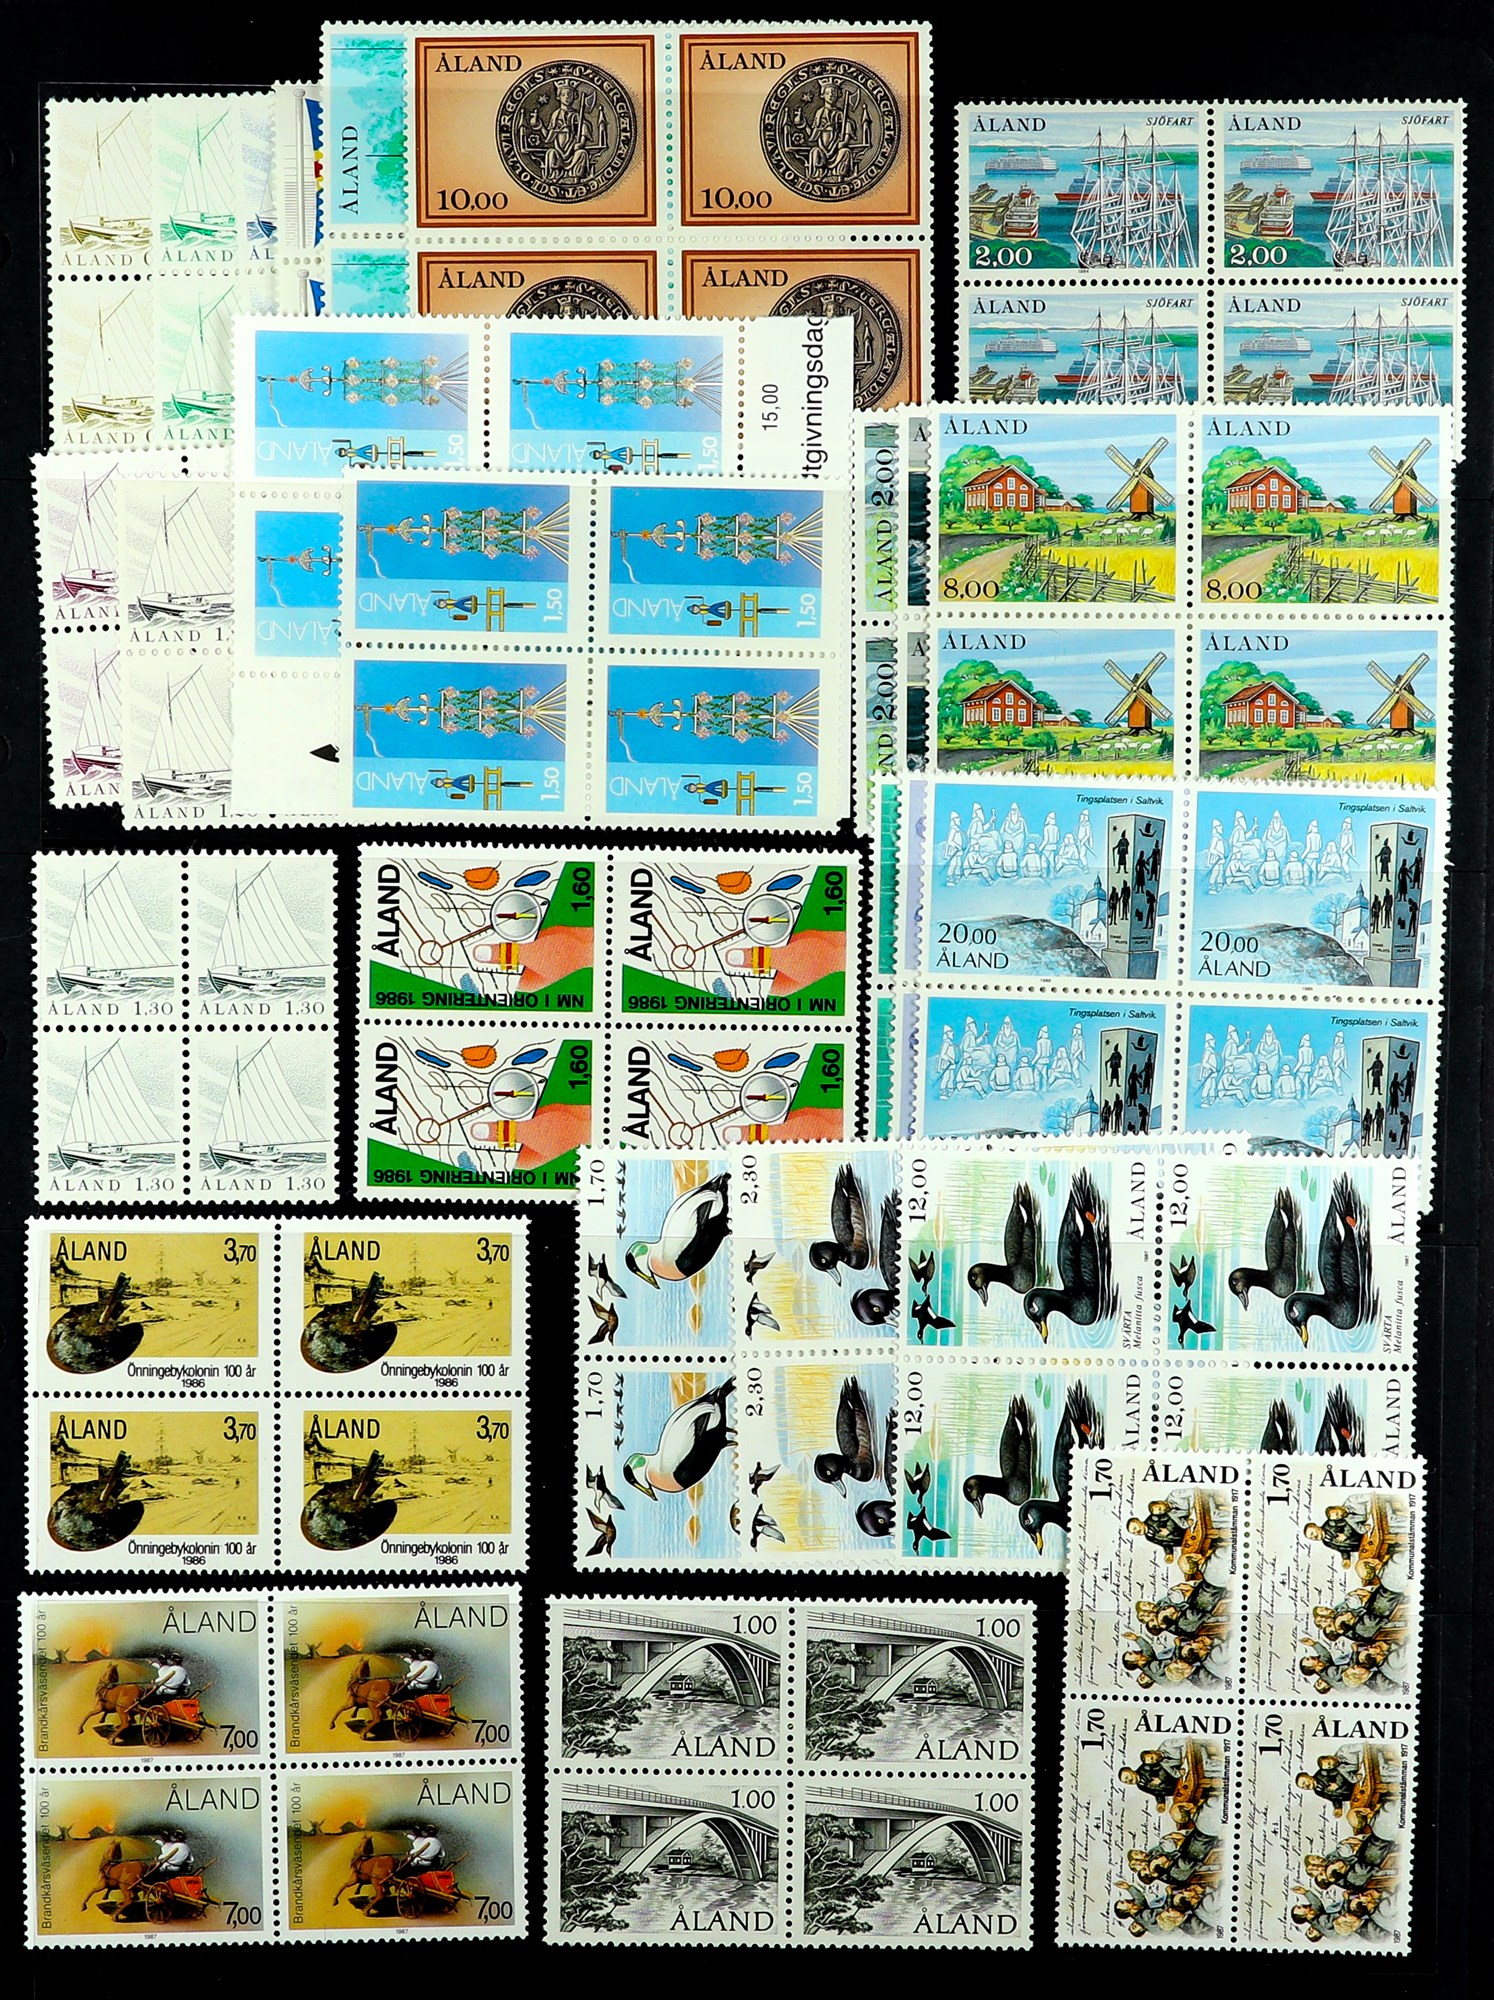 ALAND ISLANDS 1984 - 2001 COLLECTION complete for the period in never hinged mint blocks 4, also all